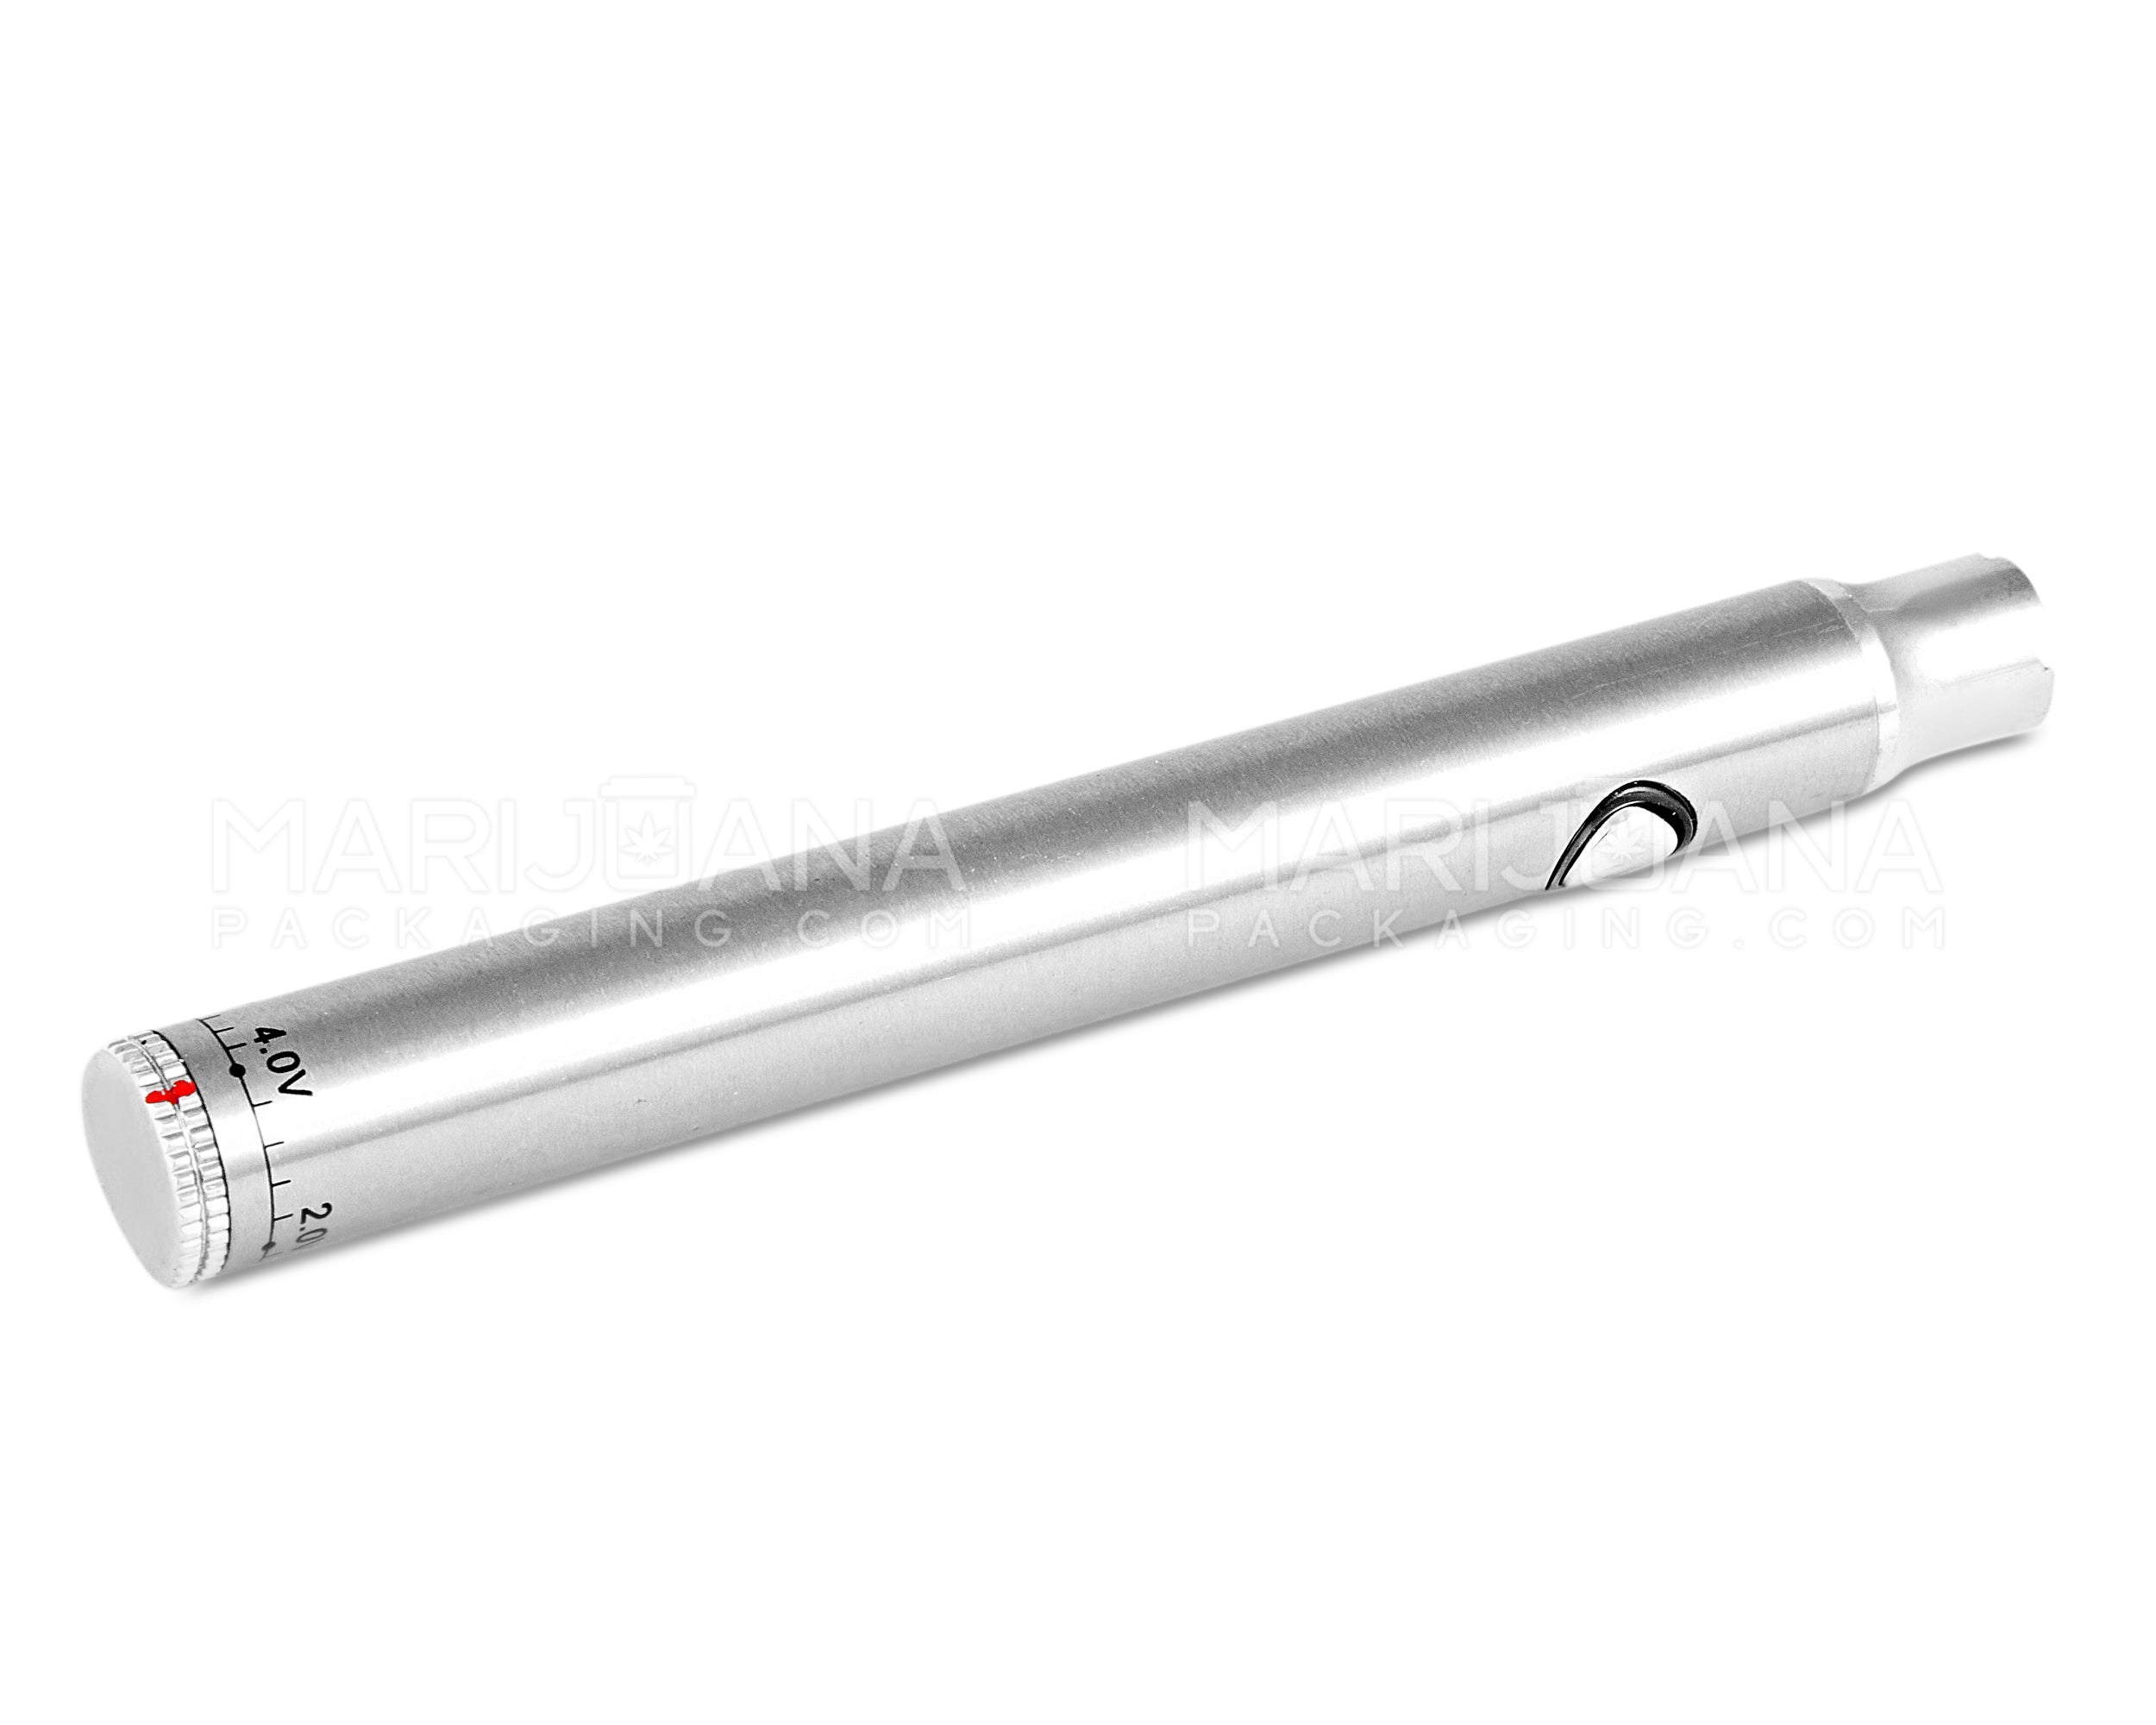 G2 Silver Variable Voltage 400mAh 510 Battery w/ USB Charger